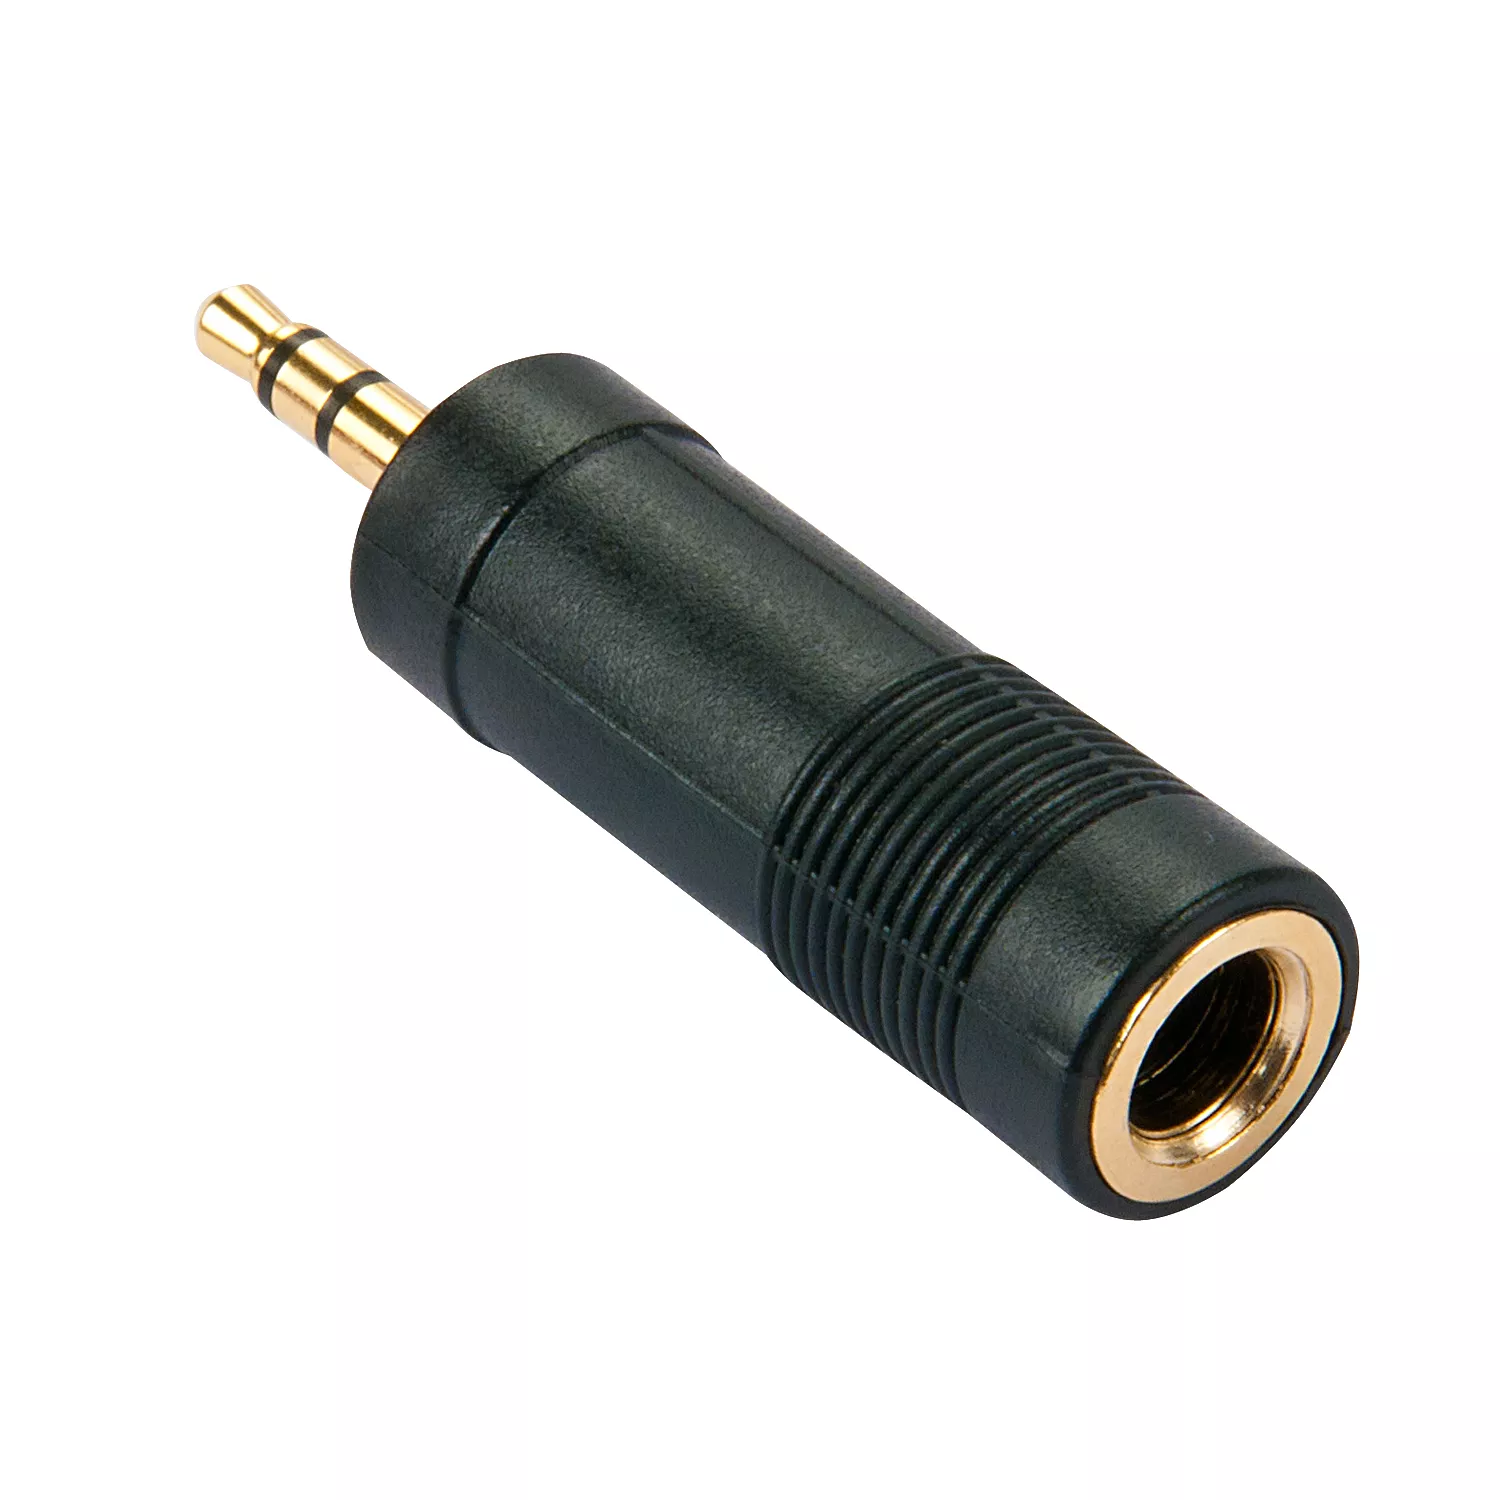 Achat Câble Audio LINDY Adapter Stereo 3.5mm female 6.3mm female gold sur hello RSE